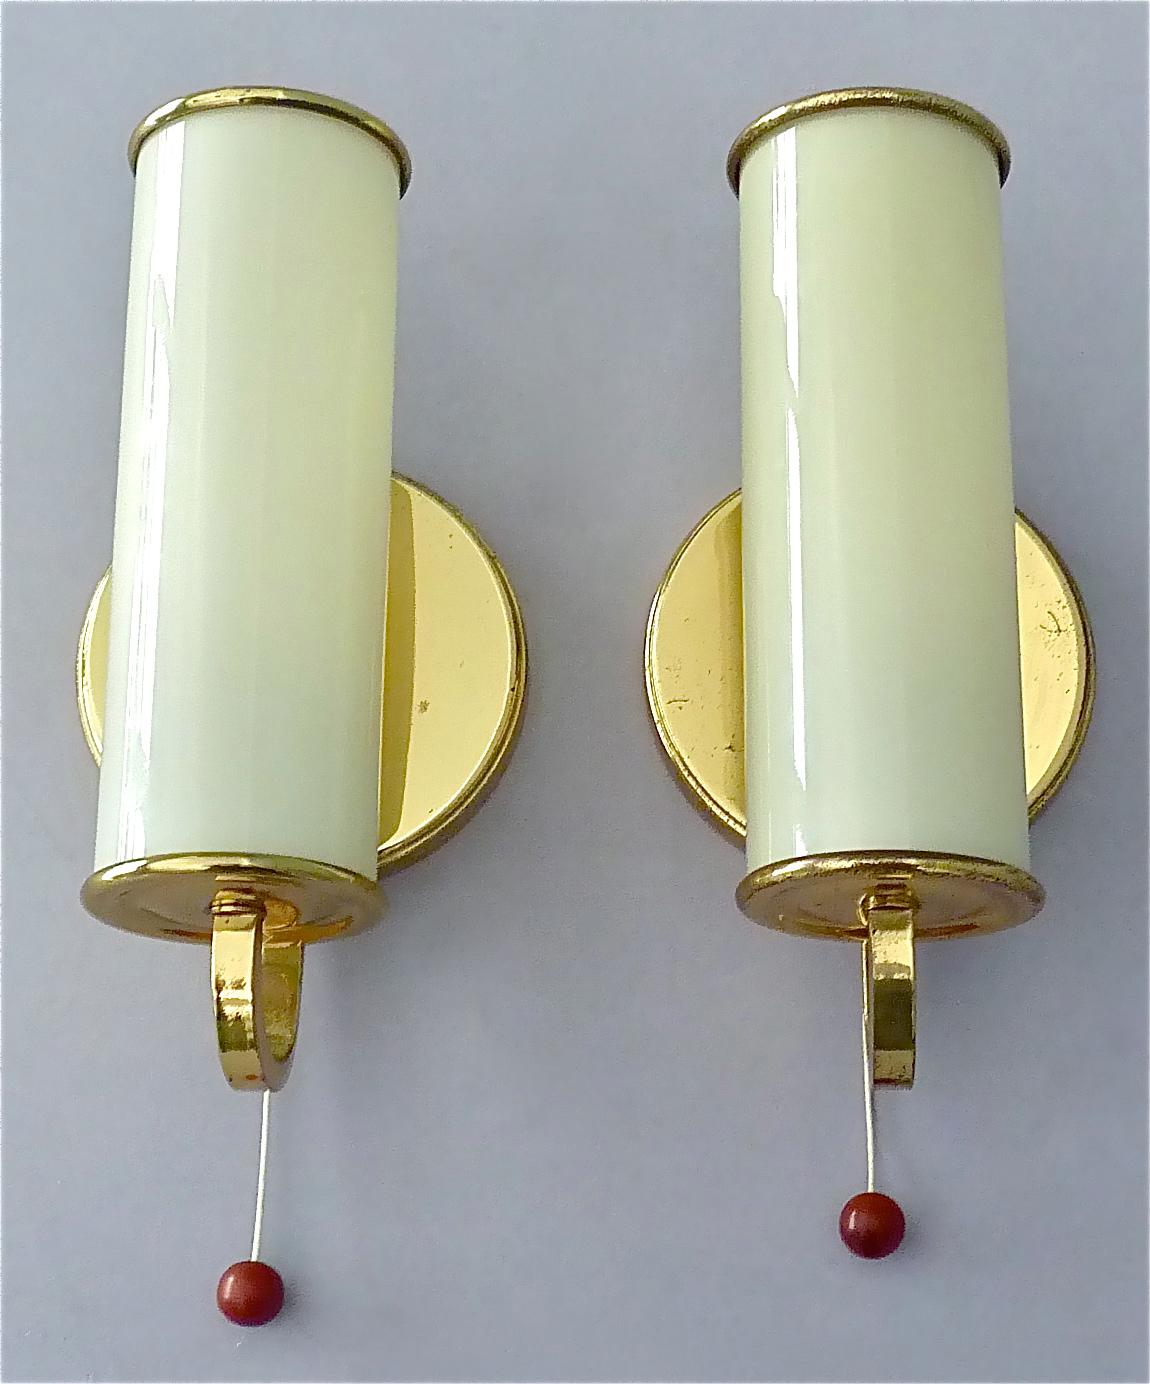 German Pair Modernist Bauhaus Sconces Tynell Style Brass Yellow Tube Glass Shades 1930s